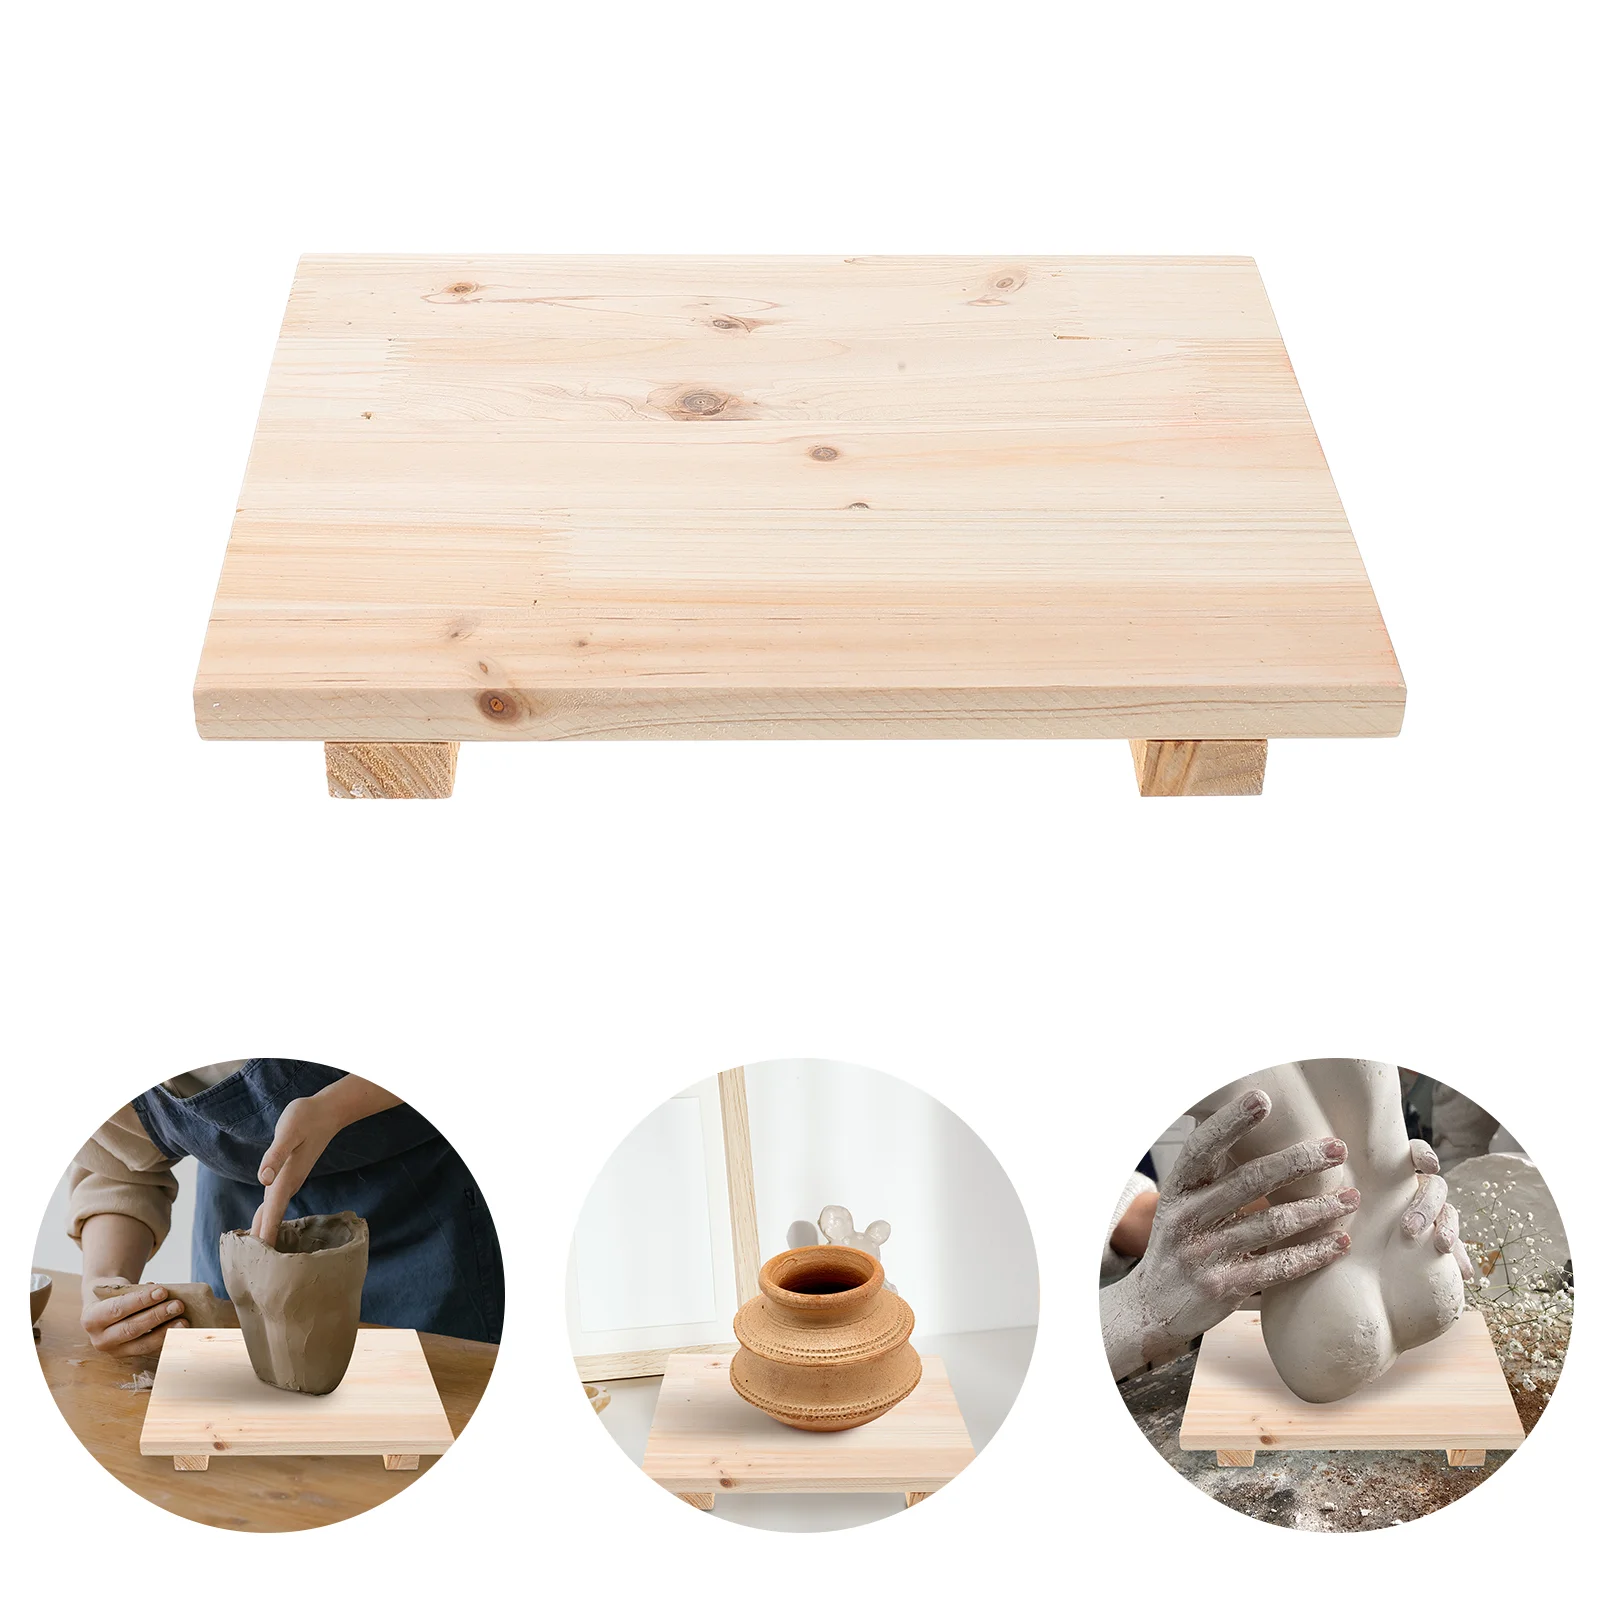 

Tools Wood Masonry Board Pottery DIY Supply Clay Potted Wooden Sculpture Showing Base Sculpting Crafts Holder Ceramic and